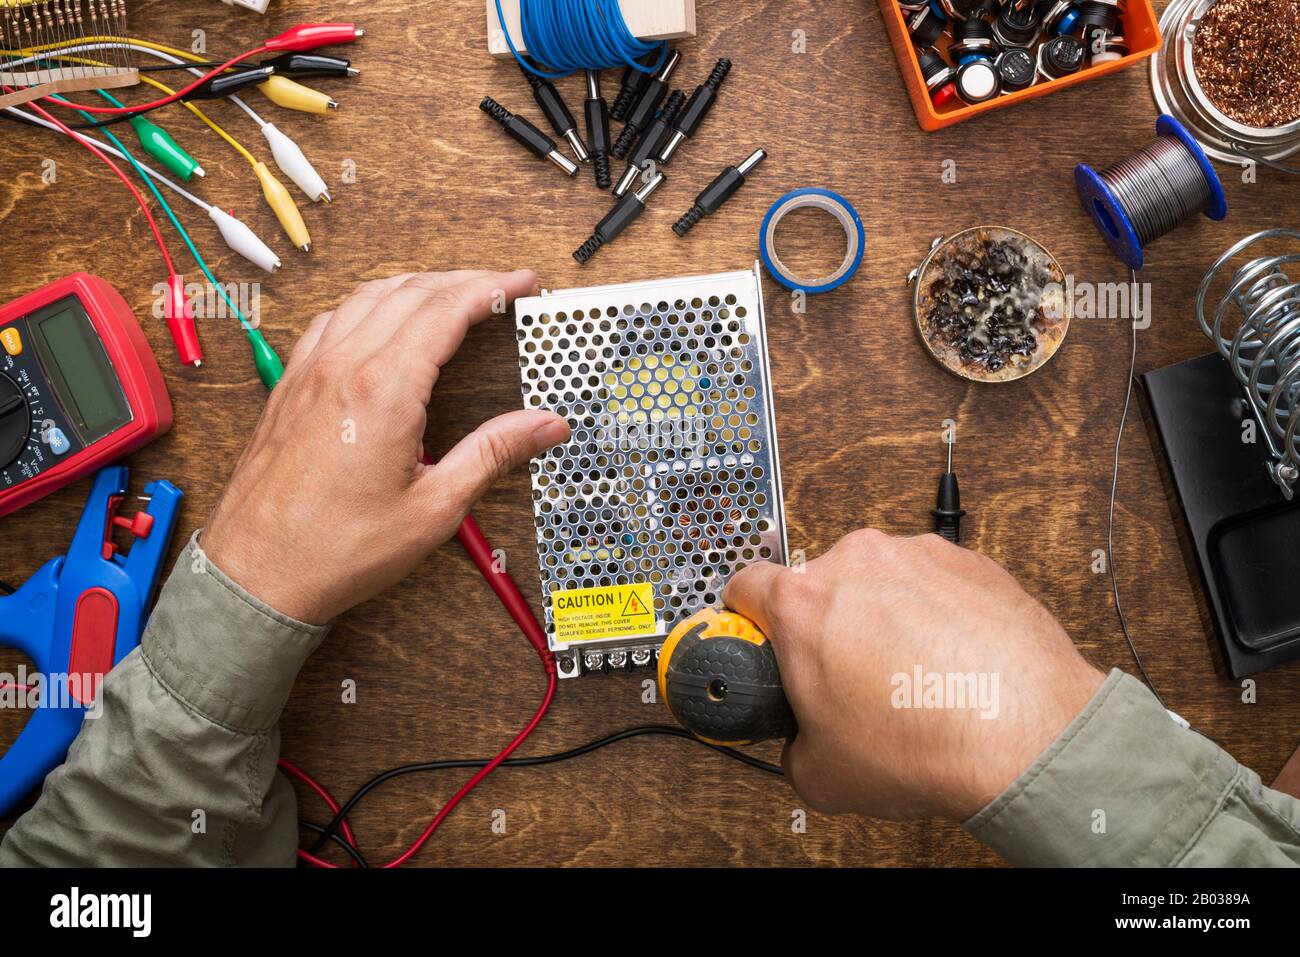 Workshop table. Working with electronics. DIY, repair concept. Stock Photo